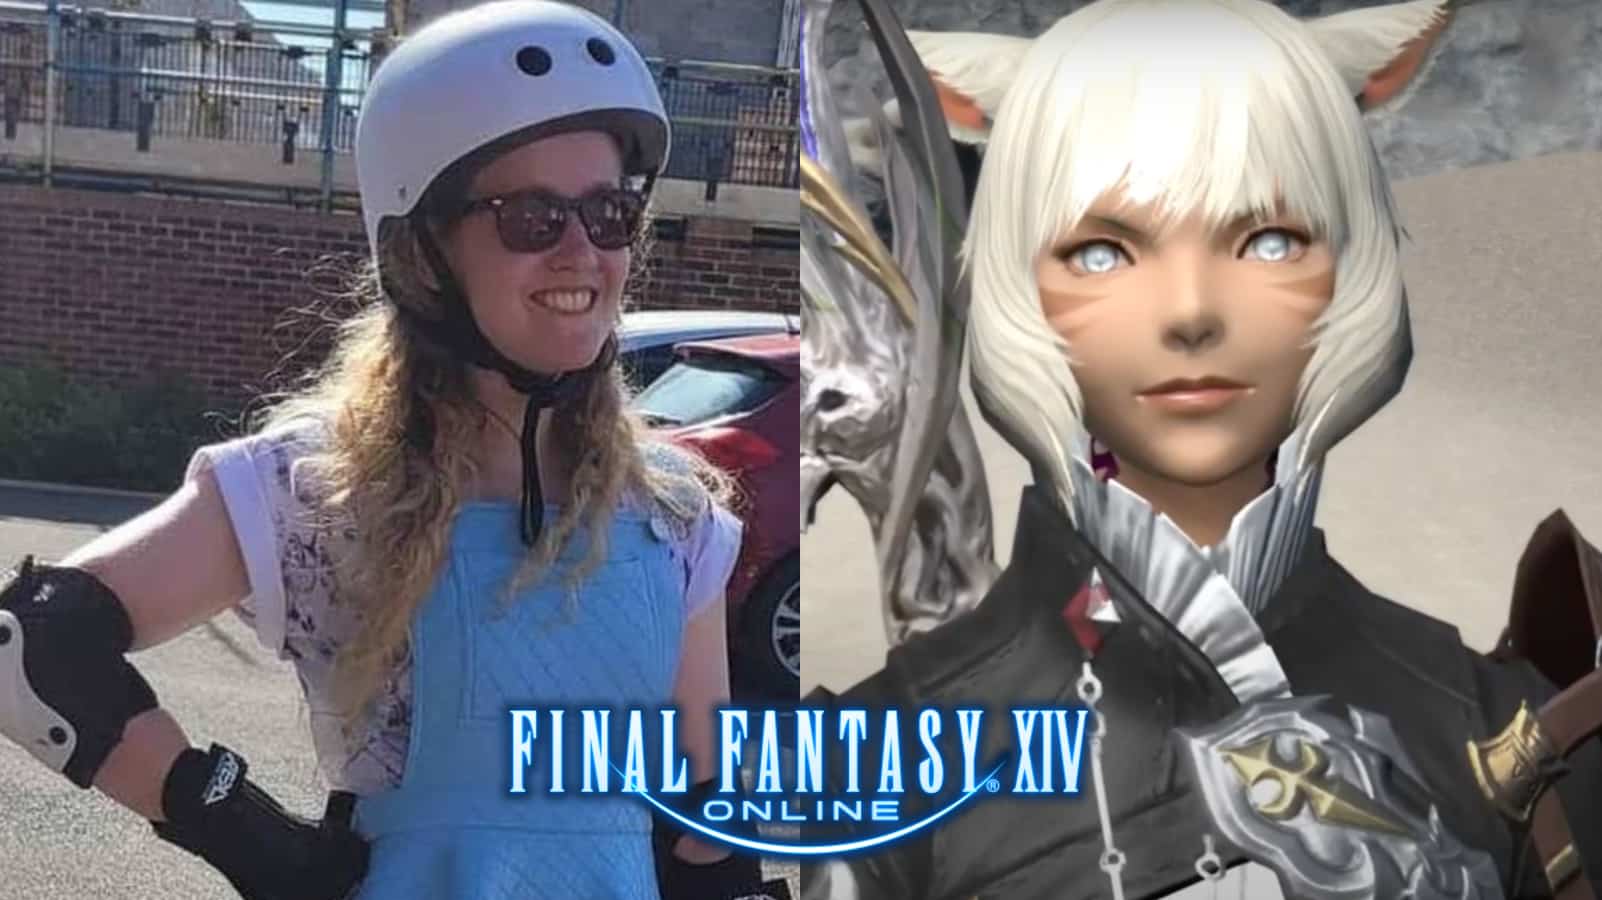 FFXIV Y'shtola cosplay feature image